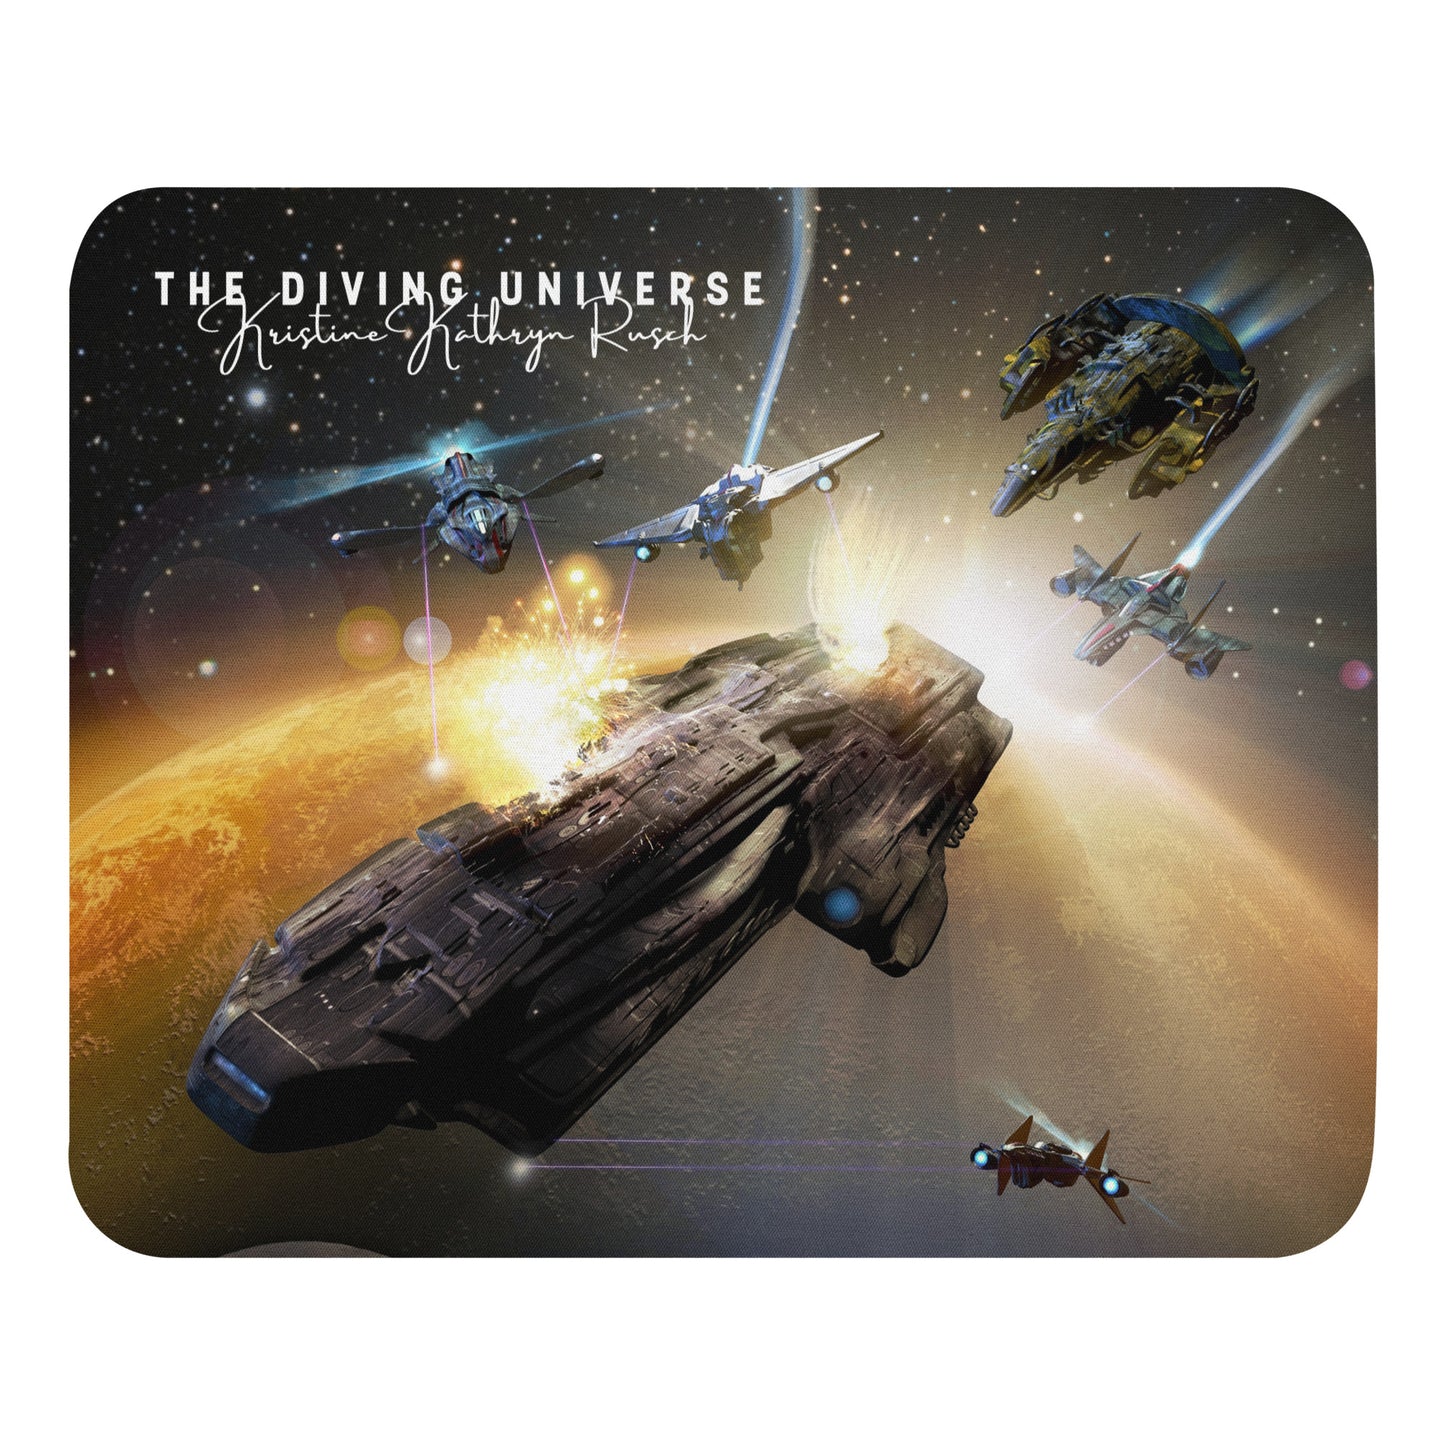 SPACESHIP BATTLE (Black Fire) Mouse Pad - The Diving Universe by Kristine Kathryn Rusch